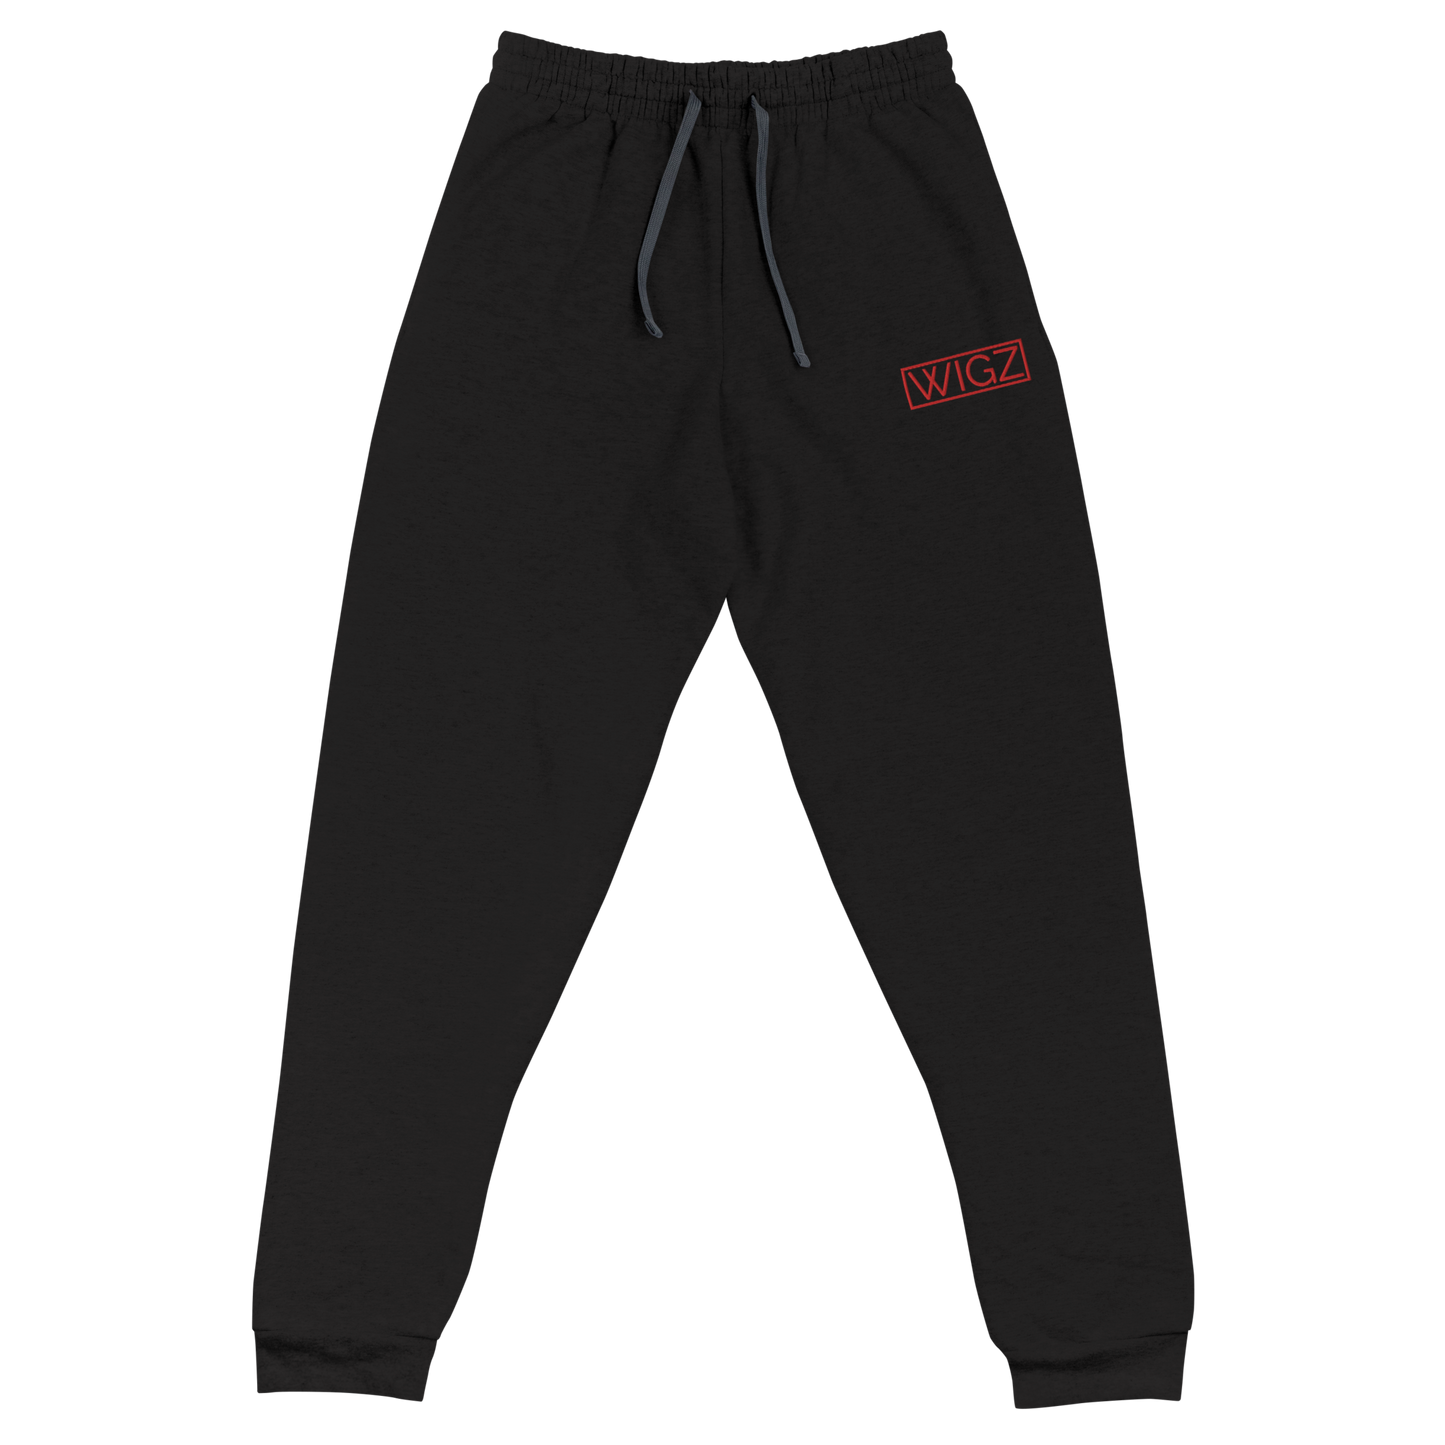 WIGZ JOGGERS